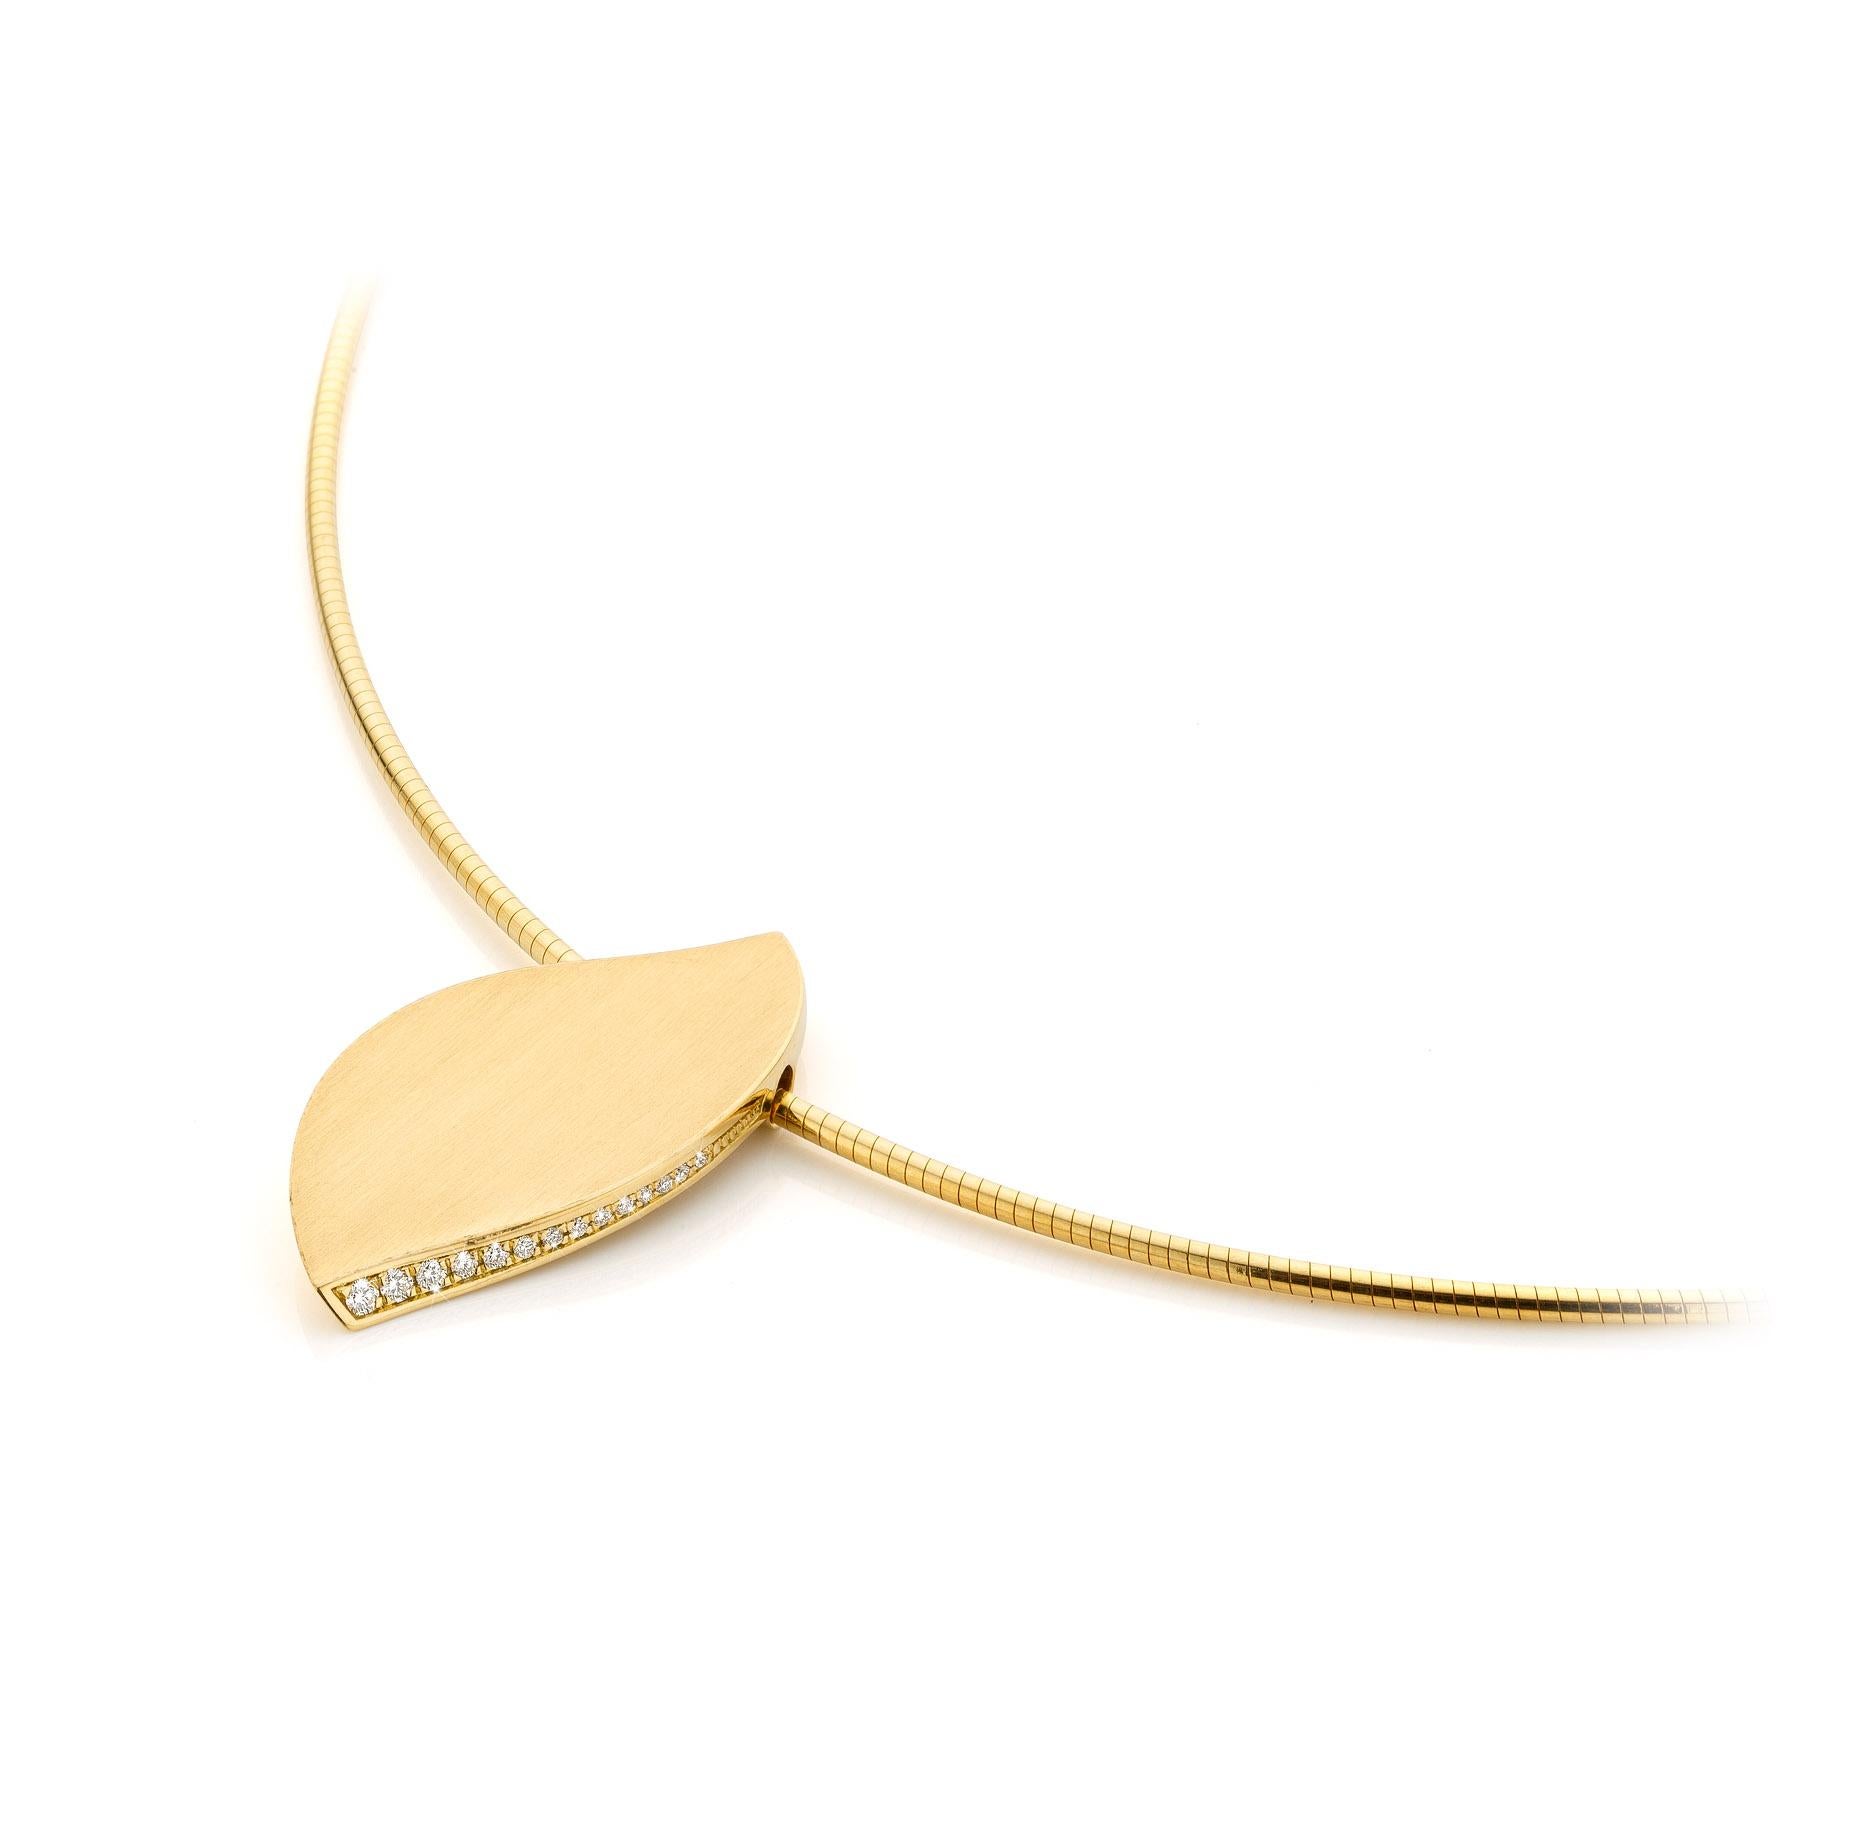 We invite you to see more of our collection from Cober Jewellery at 1stDibs!
You can type Cober Jewellery in the search bar to view more pieces of jewellery at our webshop.

Cober Jewellery with 14 Brilliant Cut Diamonds Yellow Gold leaf shaped